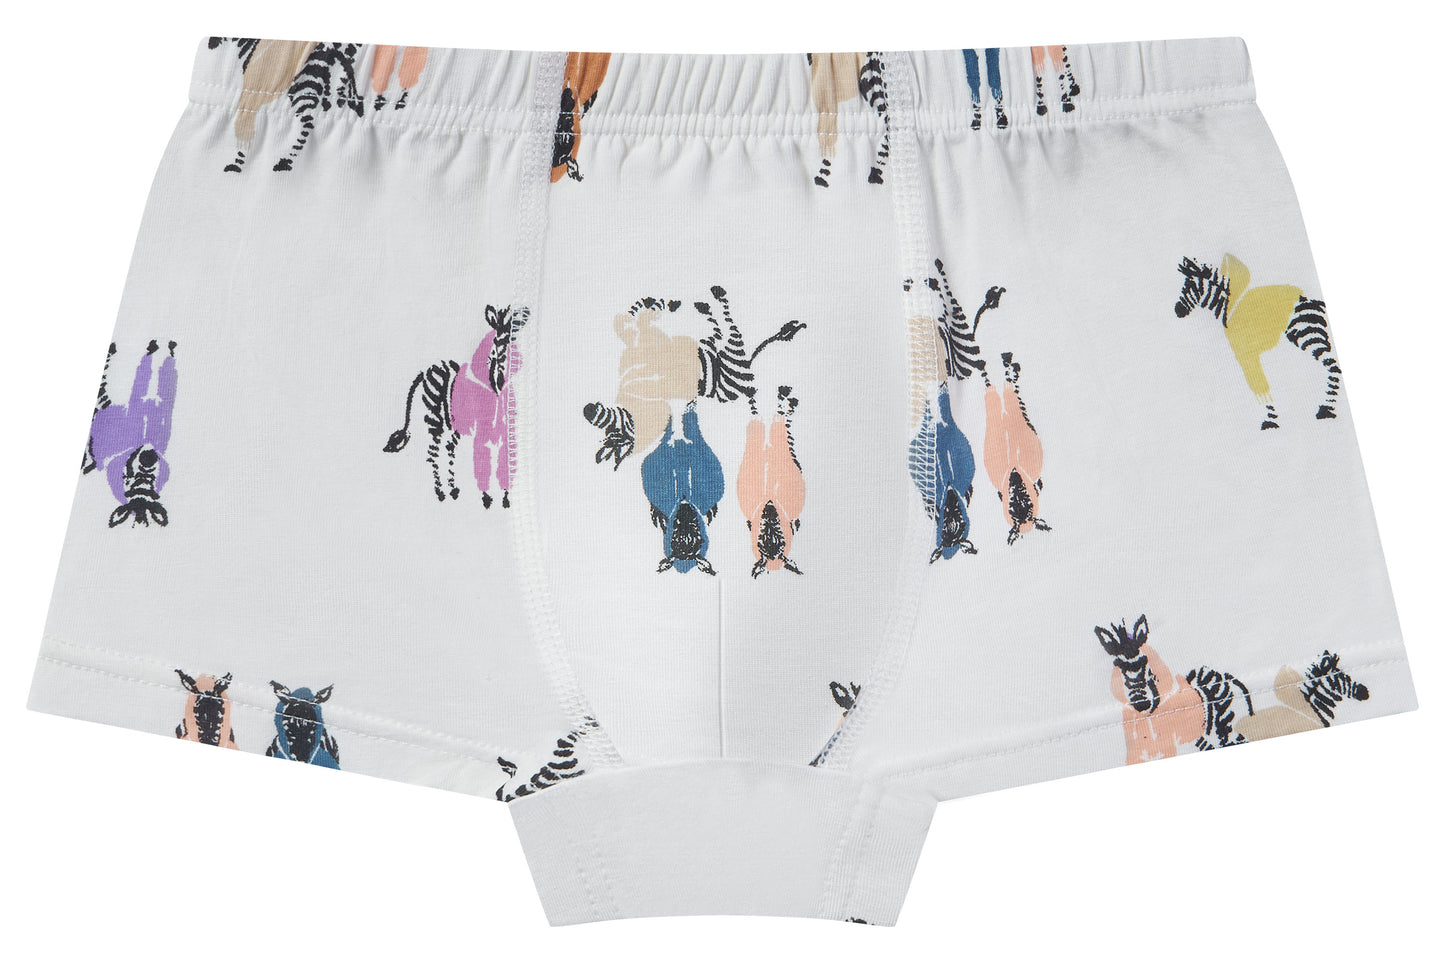 Boys Boxer Briefs Underwear (Bamboo, 2 Pack) - The Lion & The Goose – Nest  Designs